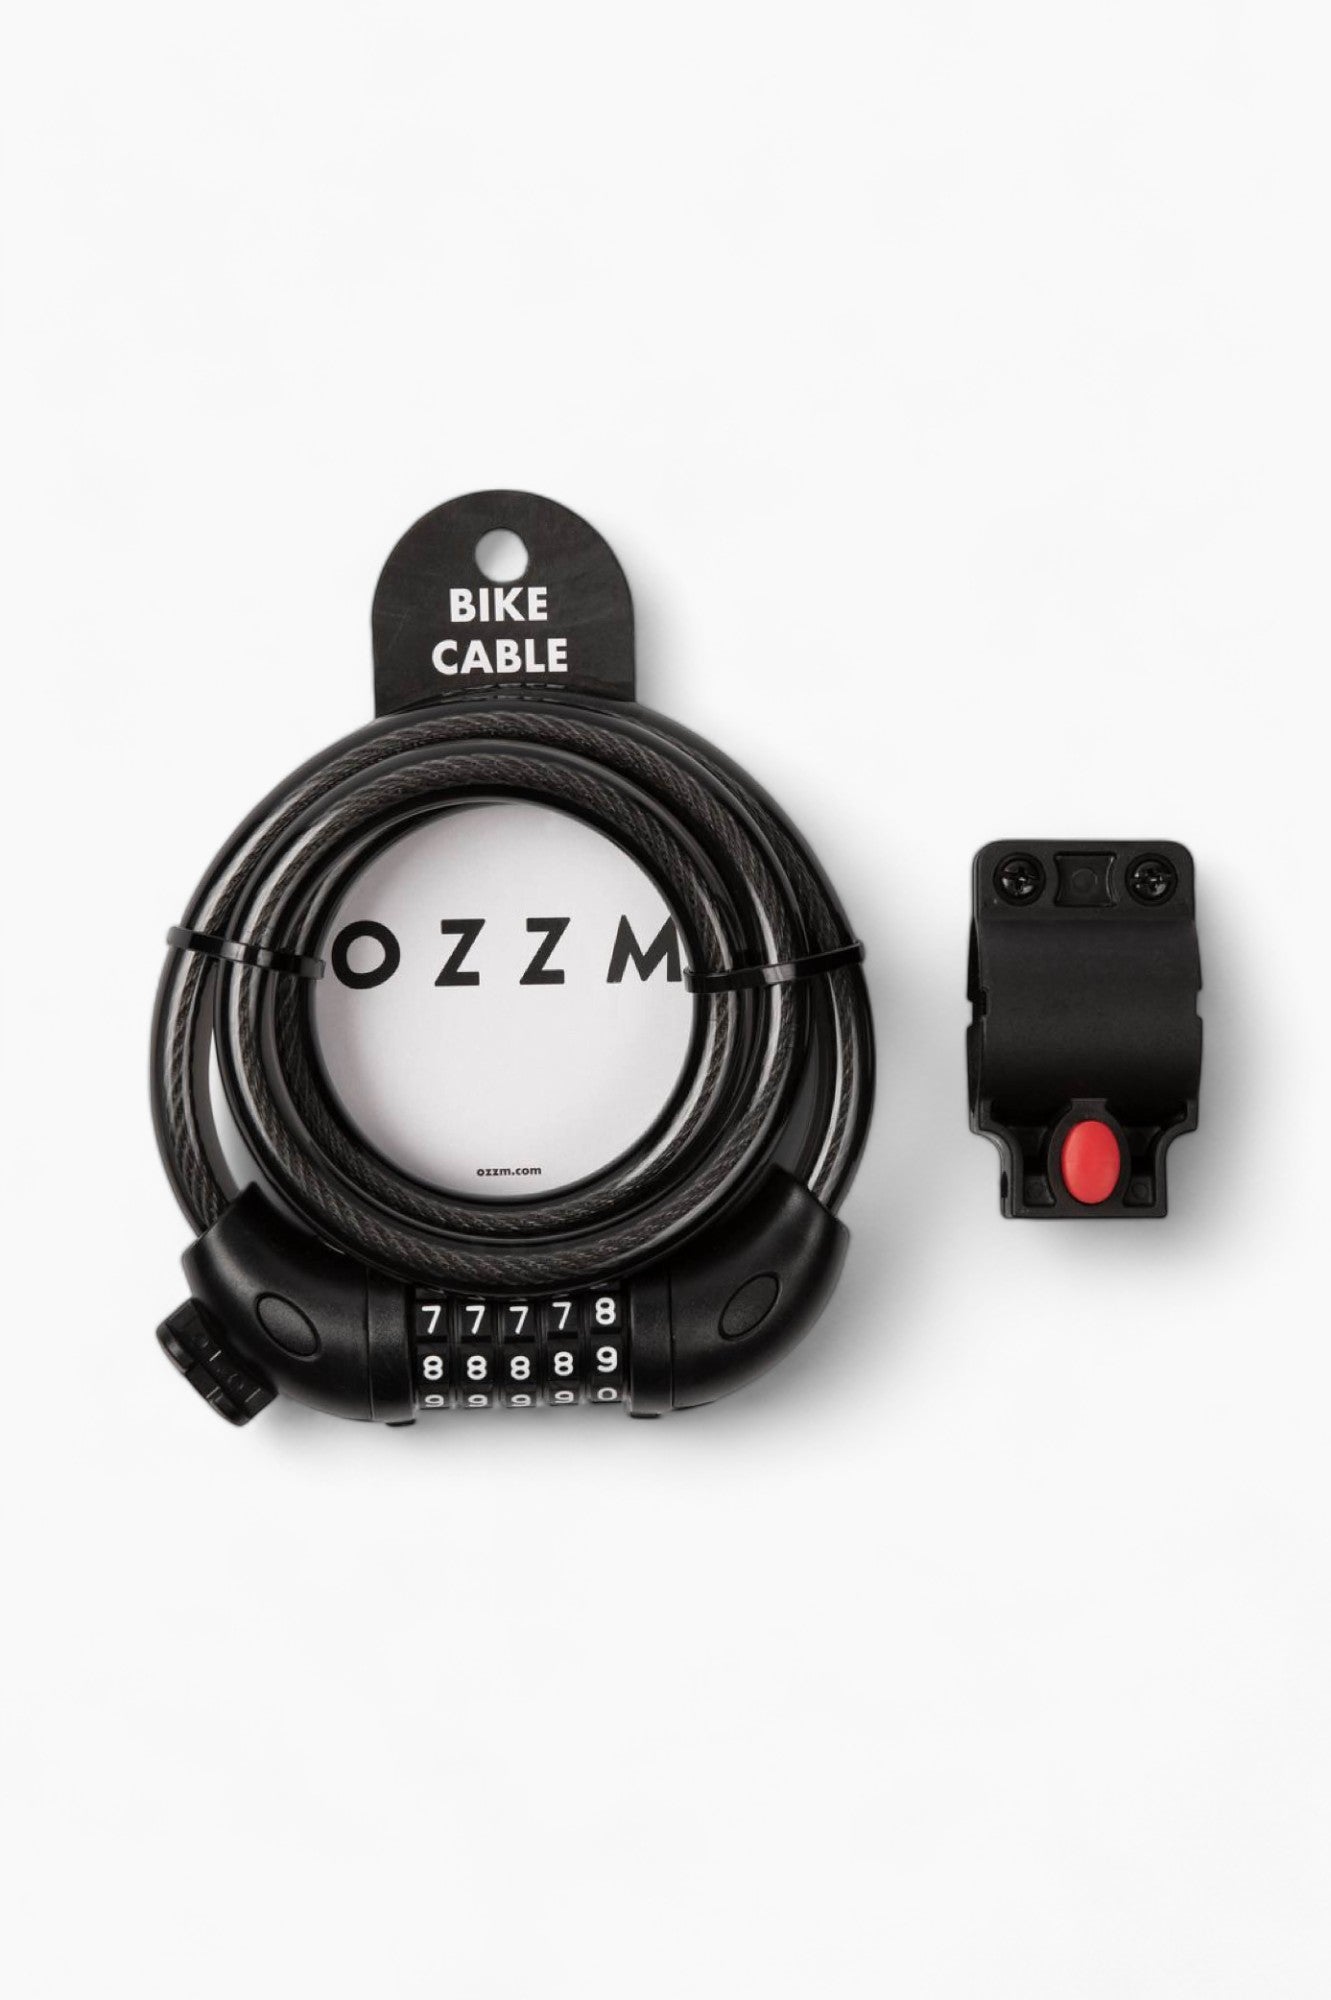 OZZM 5-Digit Cable Lock